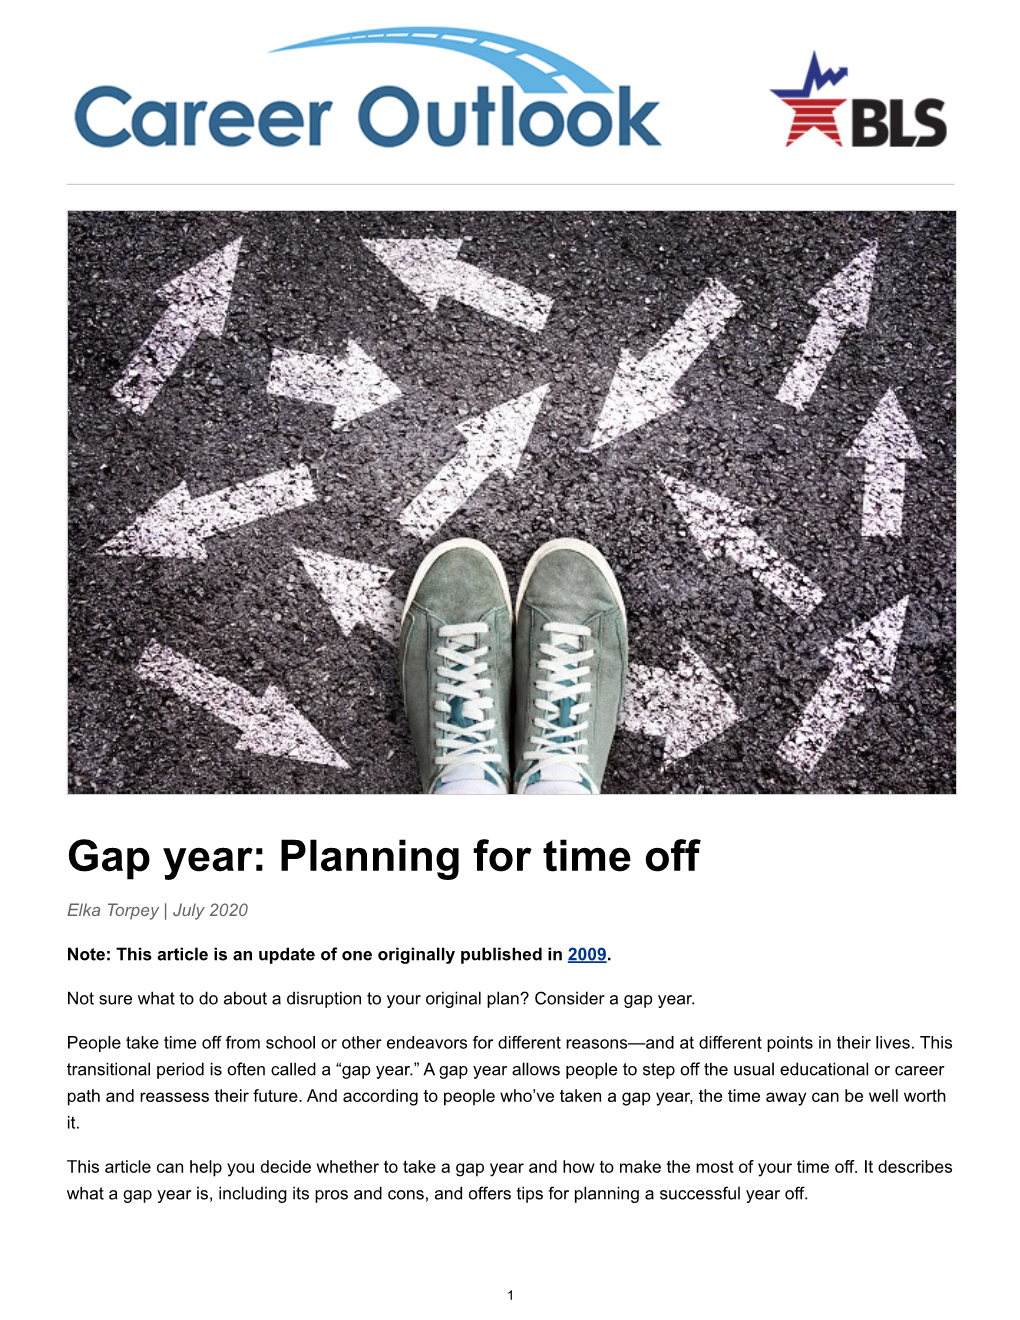 Gap Year: Planning for Time Off